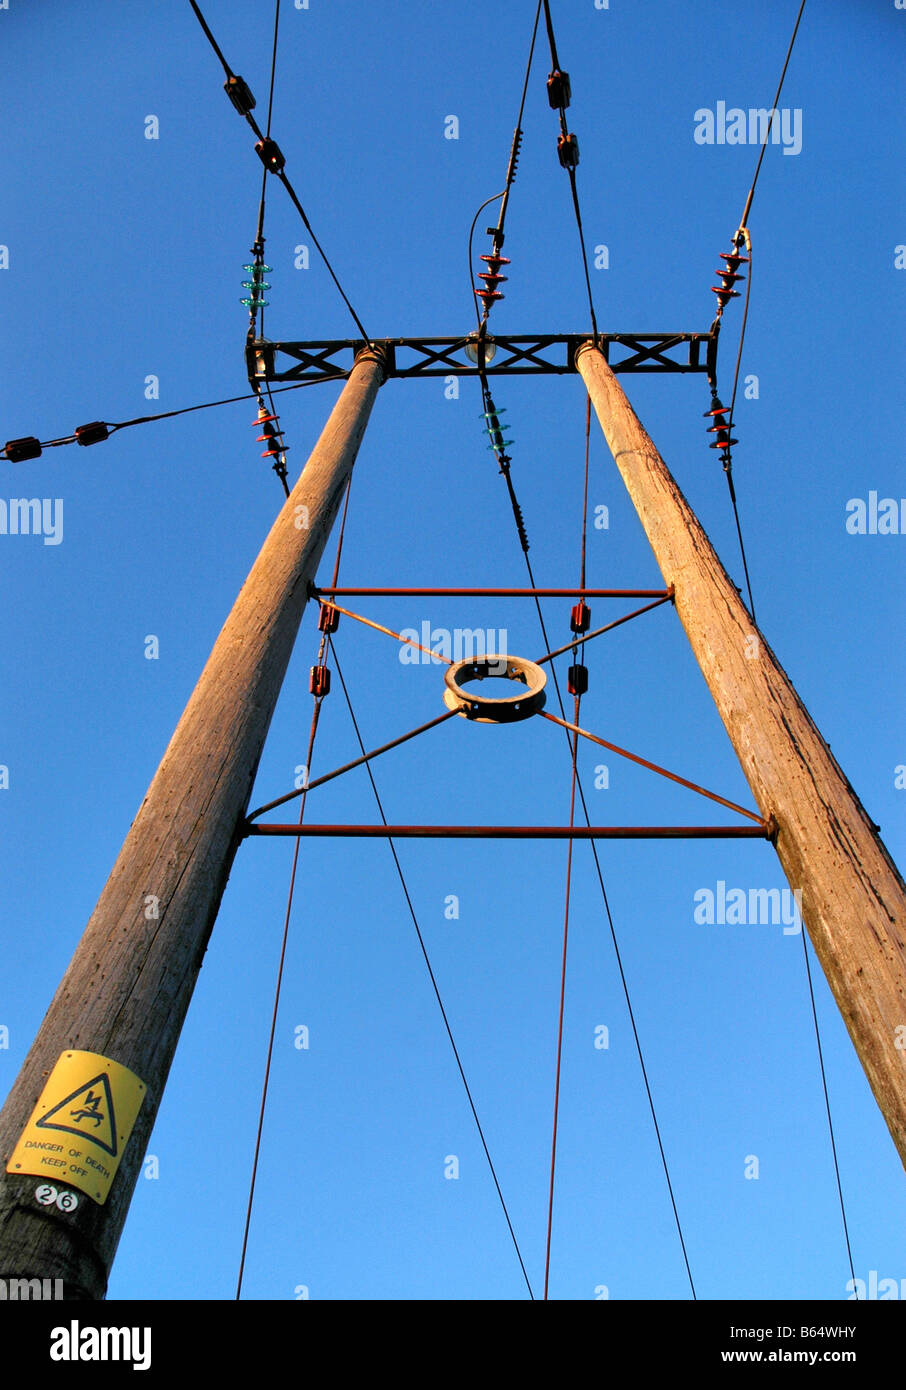 Looking up at an electric pylon - A danger sign is present on the base of one of the poles. Stock Photo